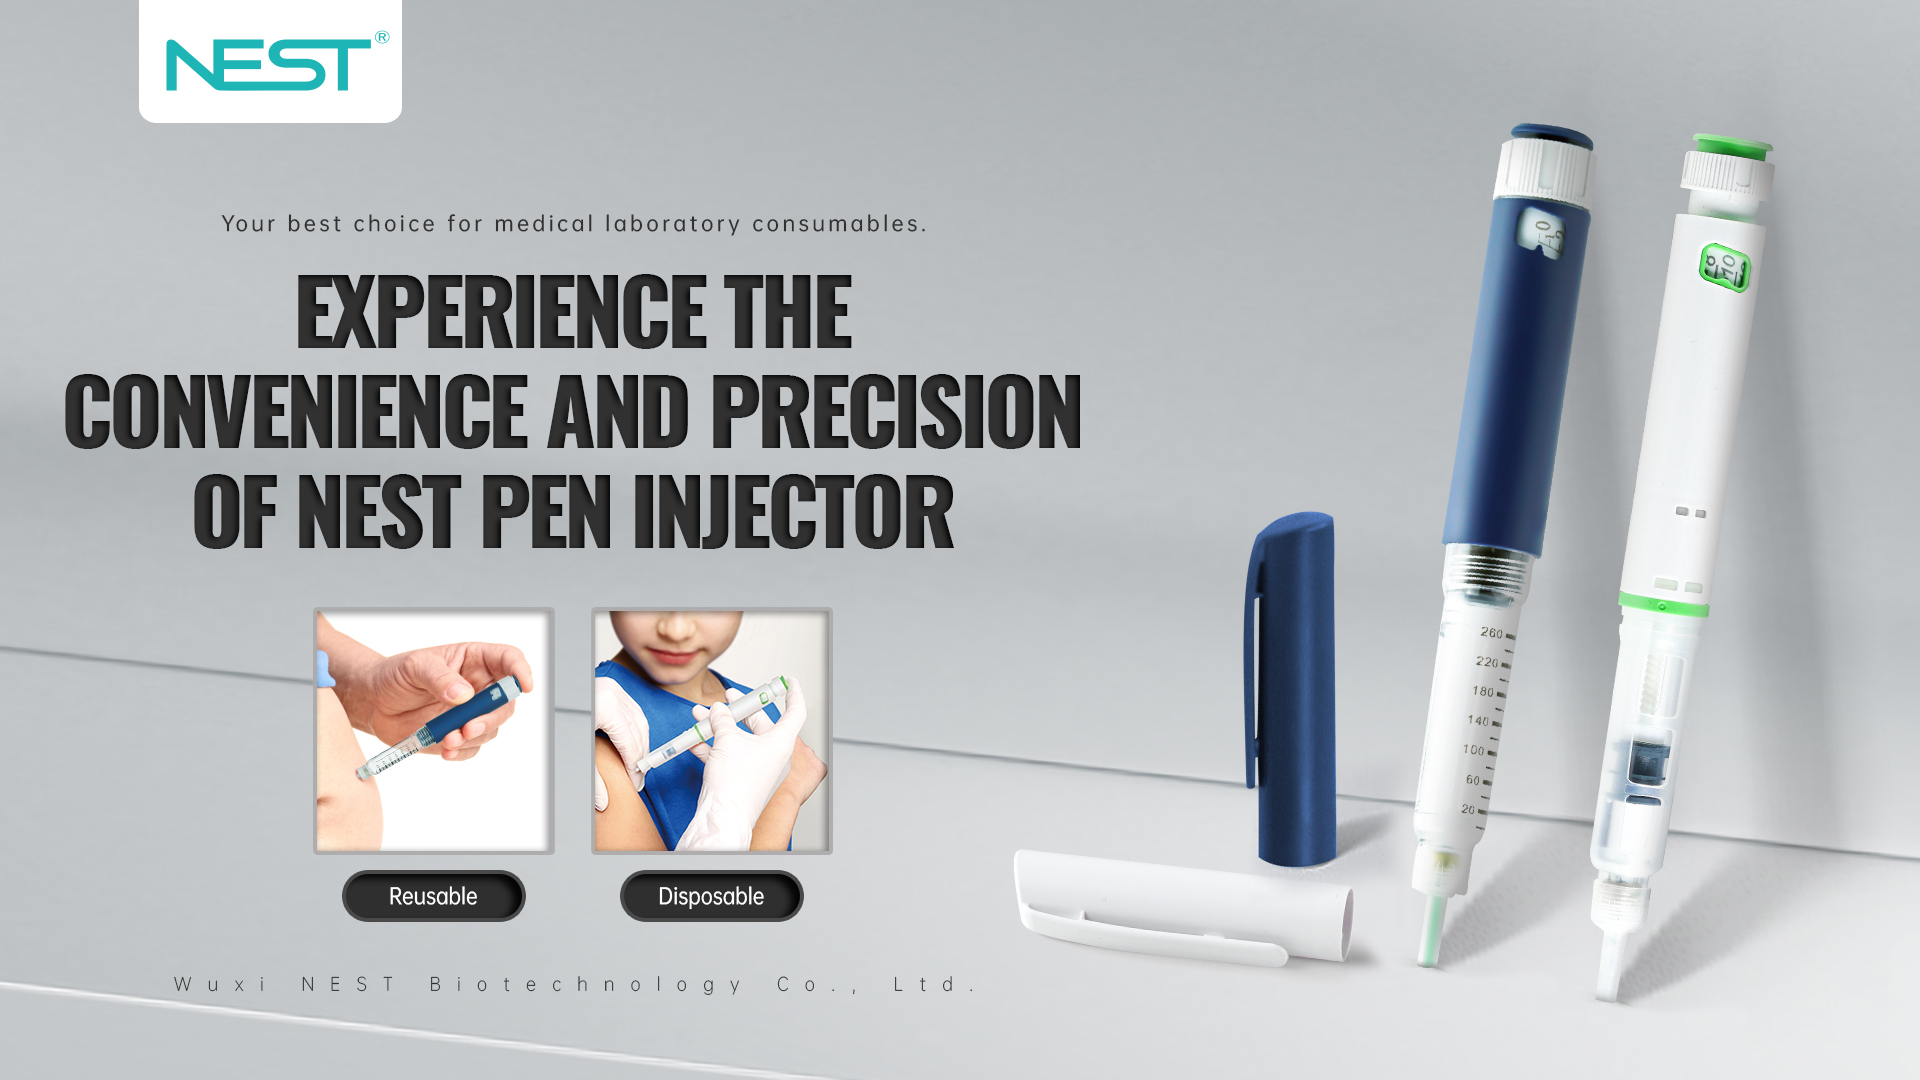 Universal Self-Injectable Medication Delivery: NEST Pen Injectors